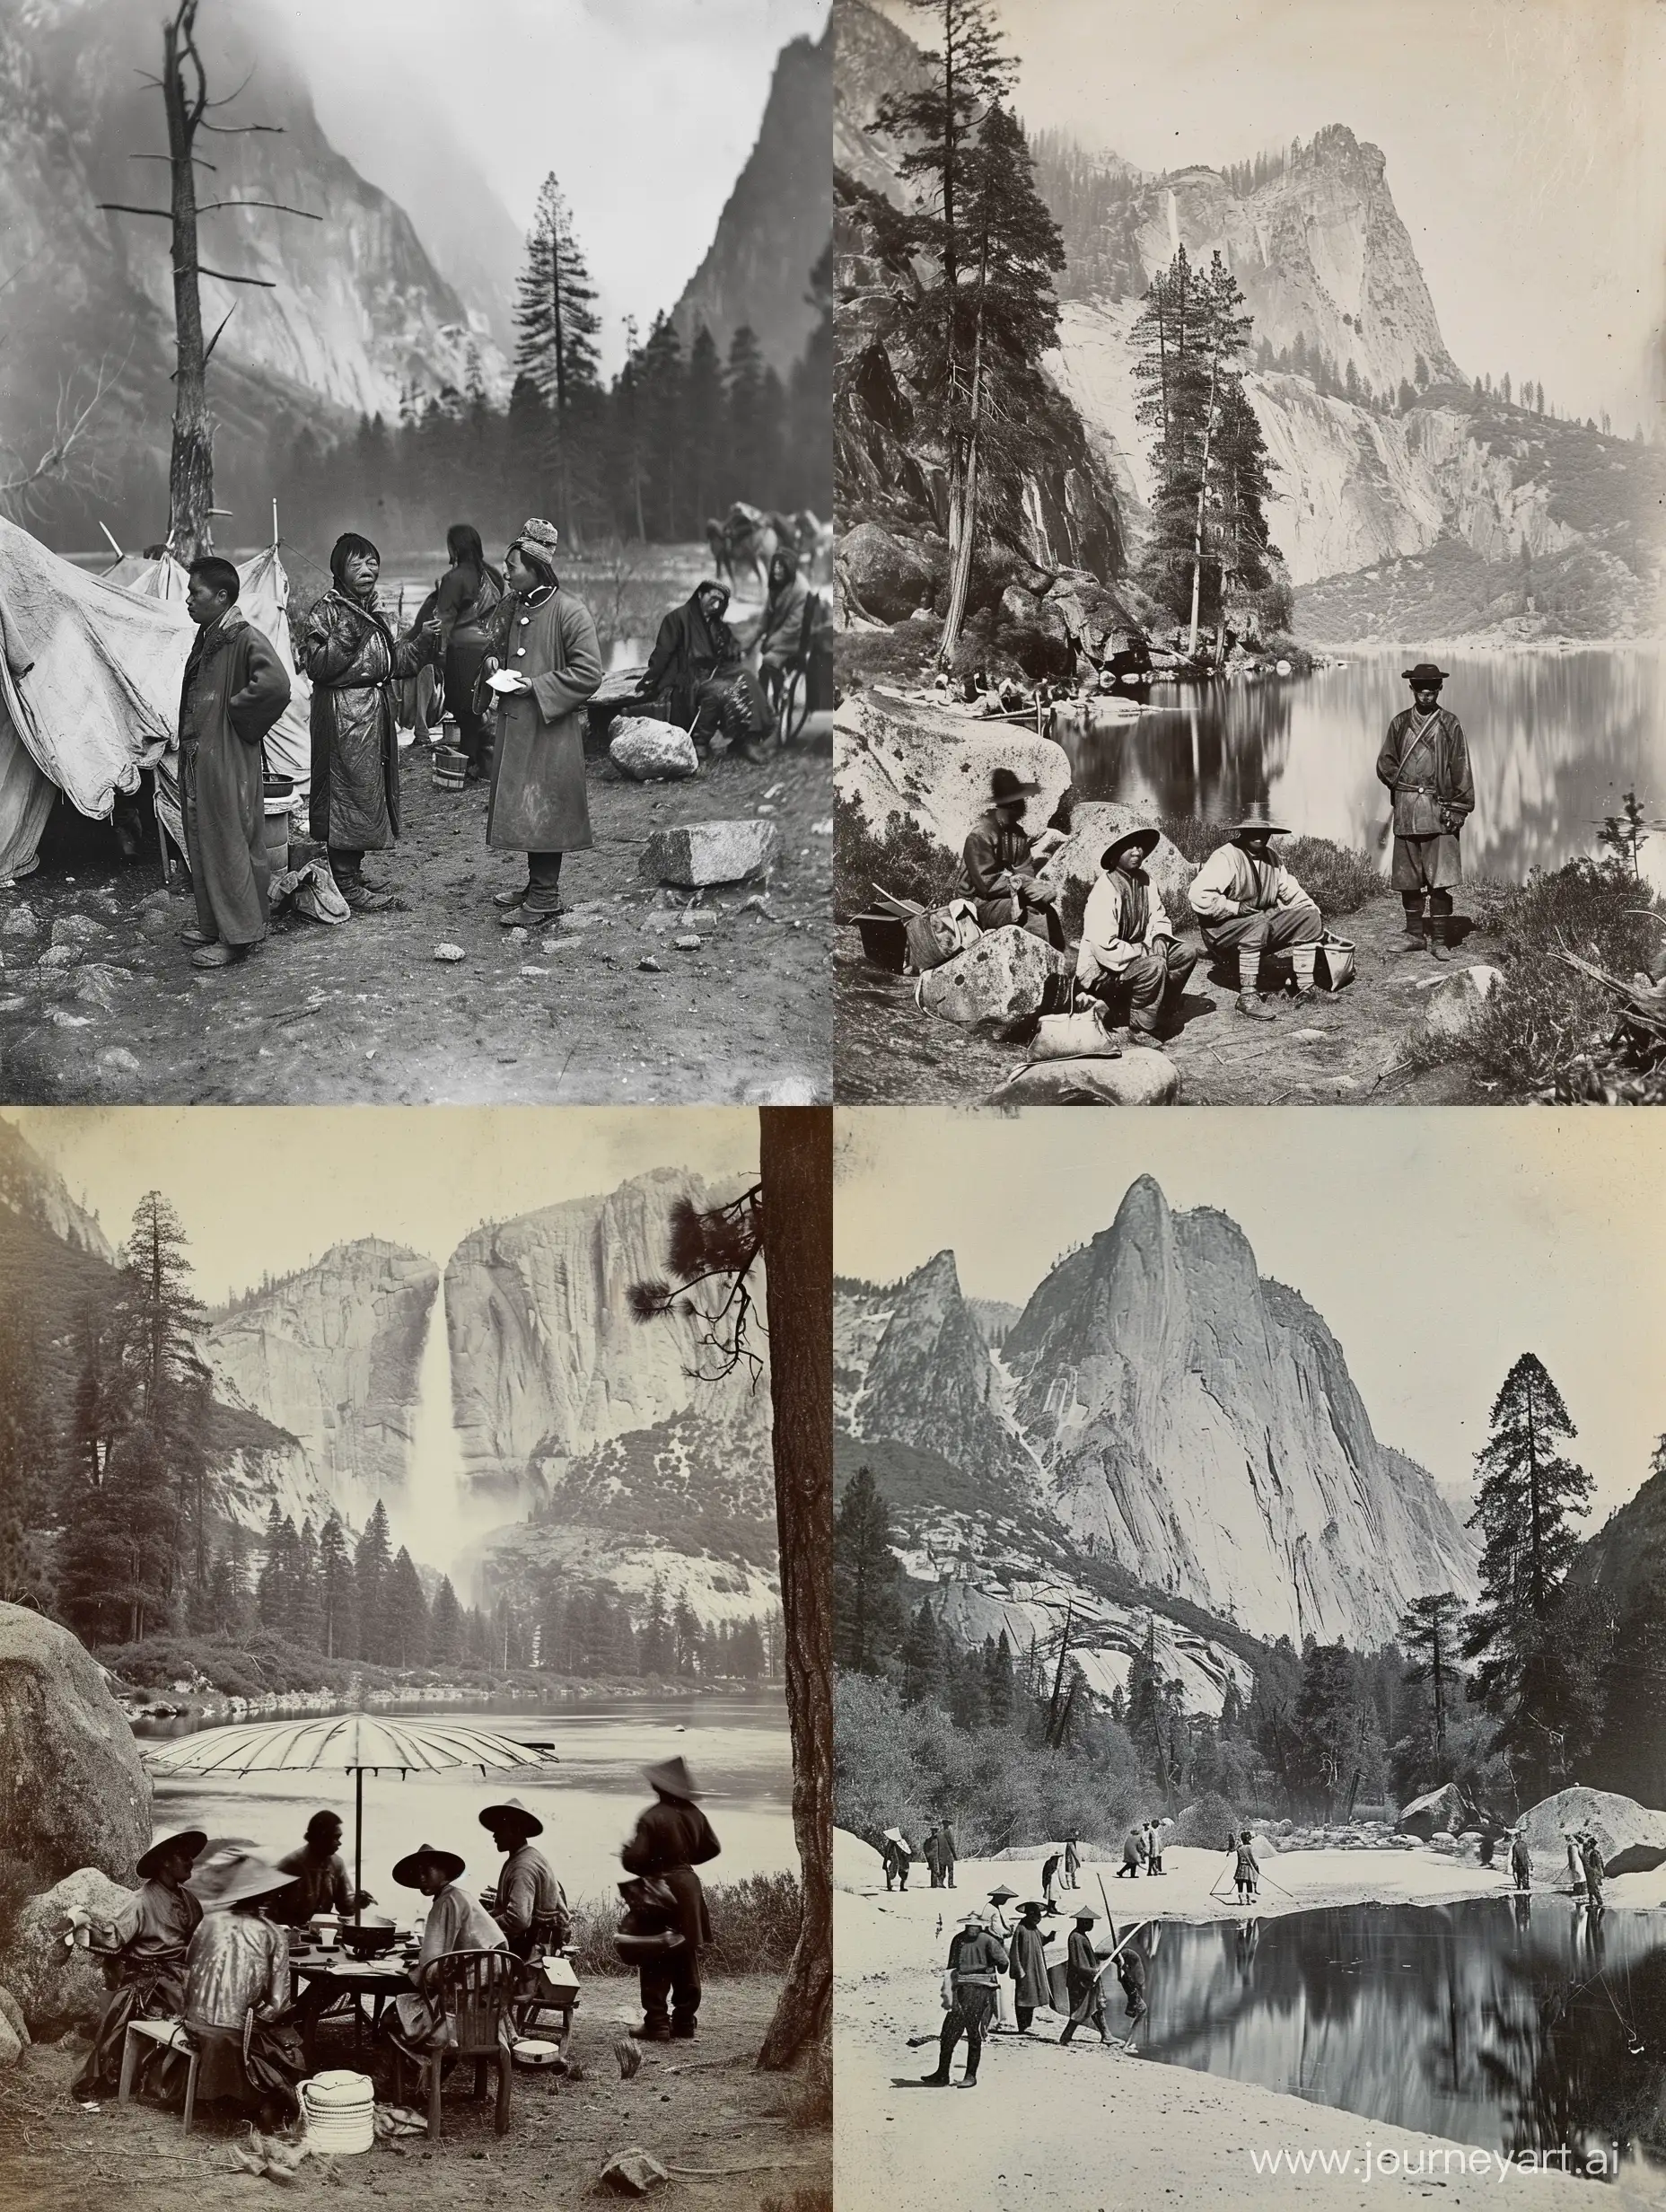 Historical black and white photographs depicting Chinese people at Yosemite in the late 1800s.